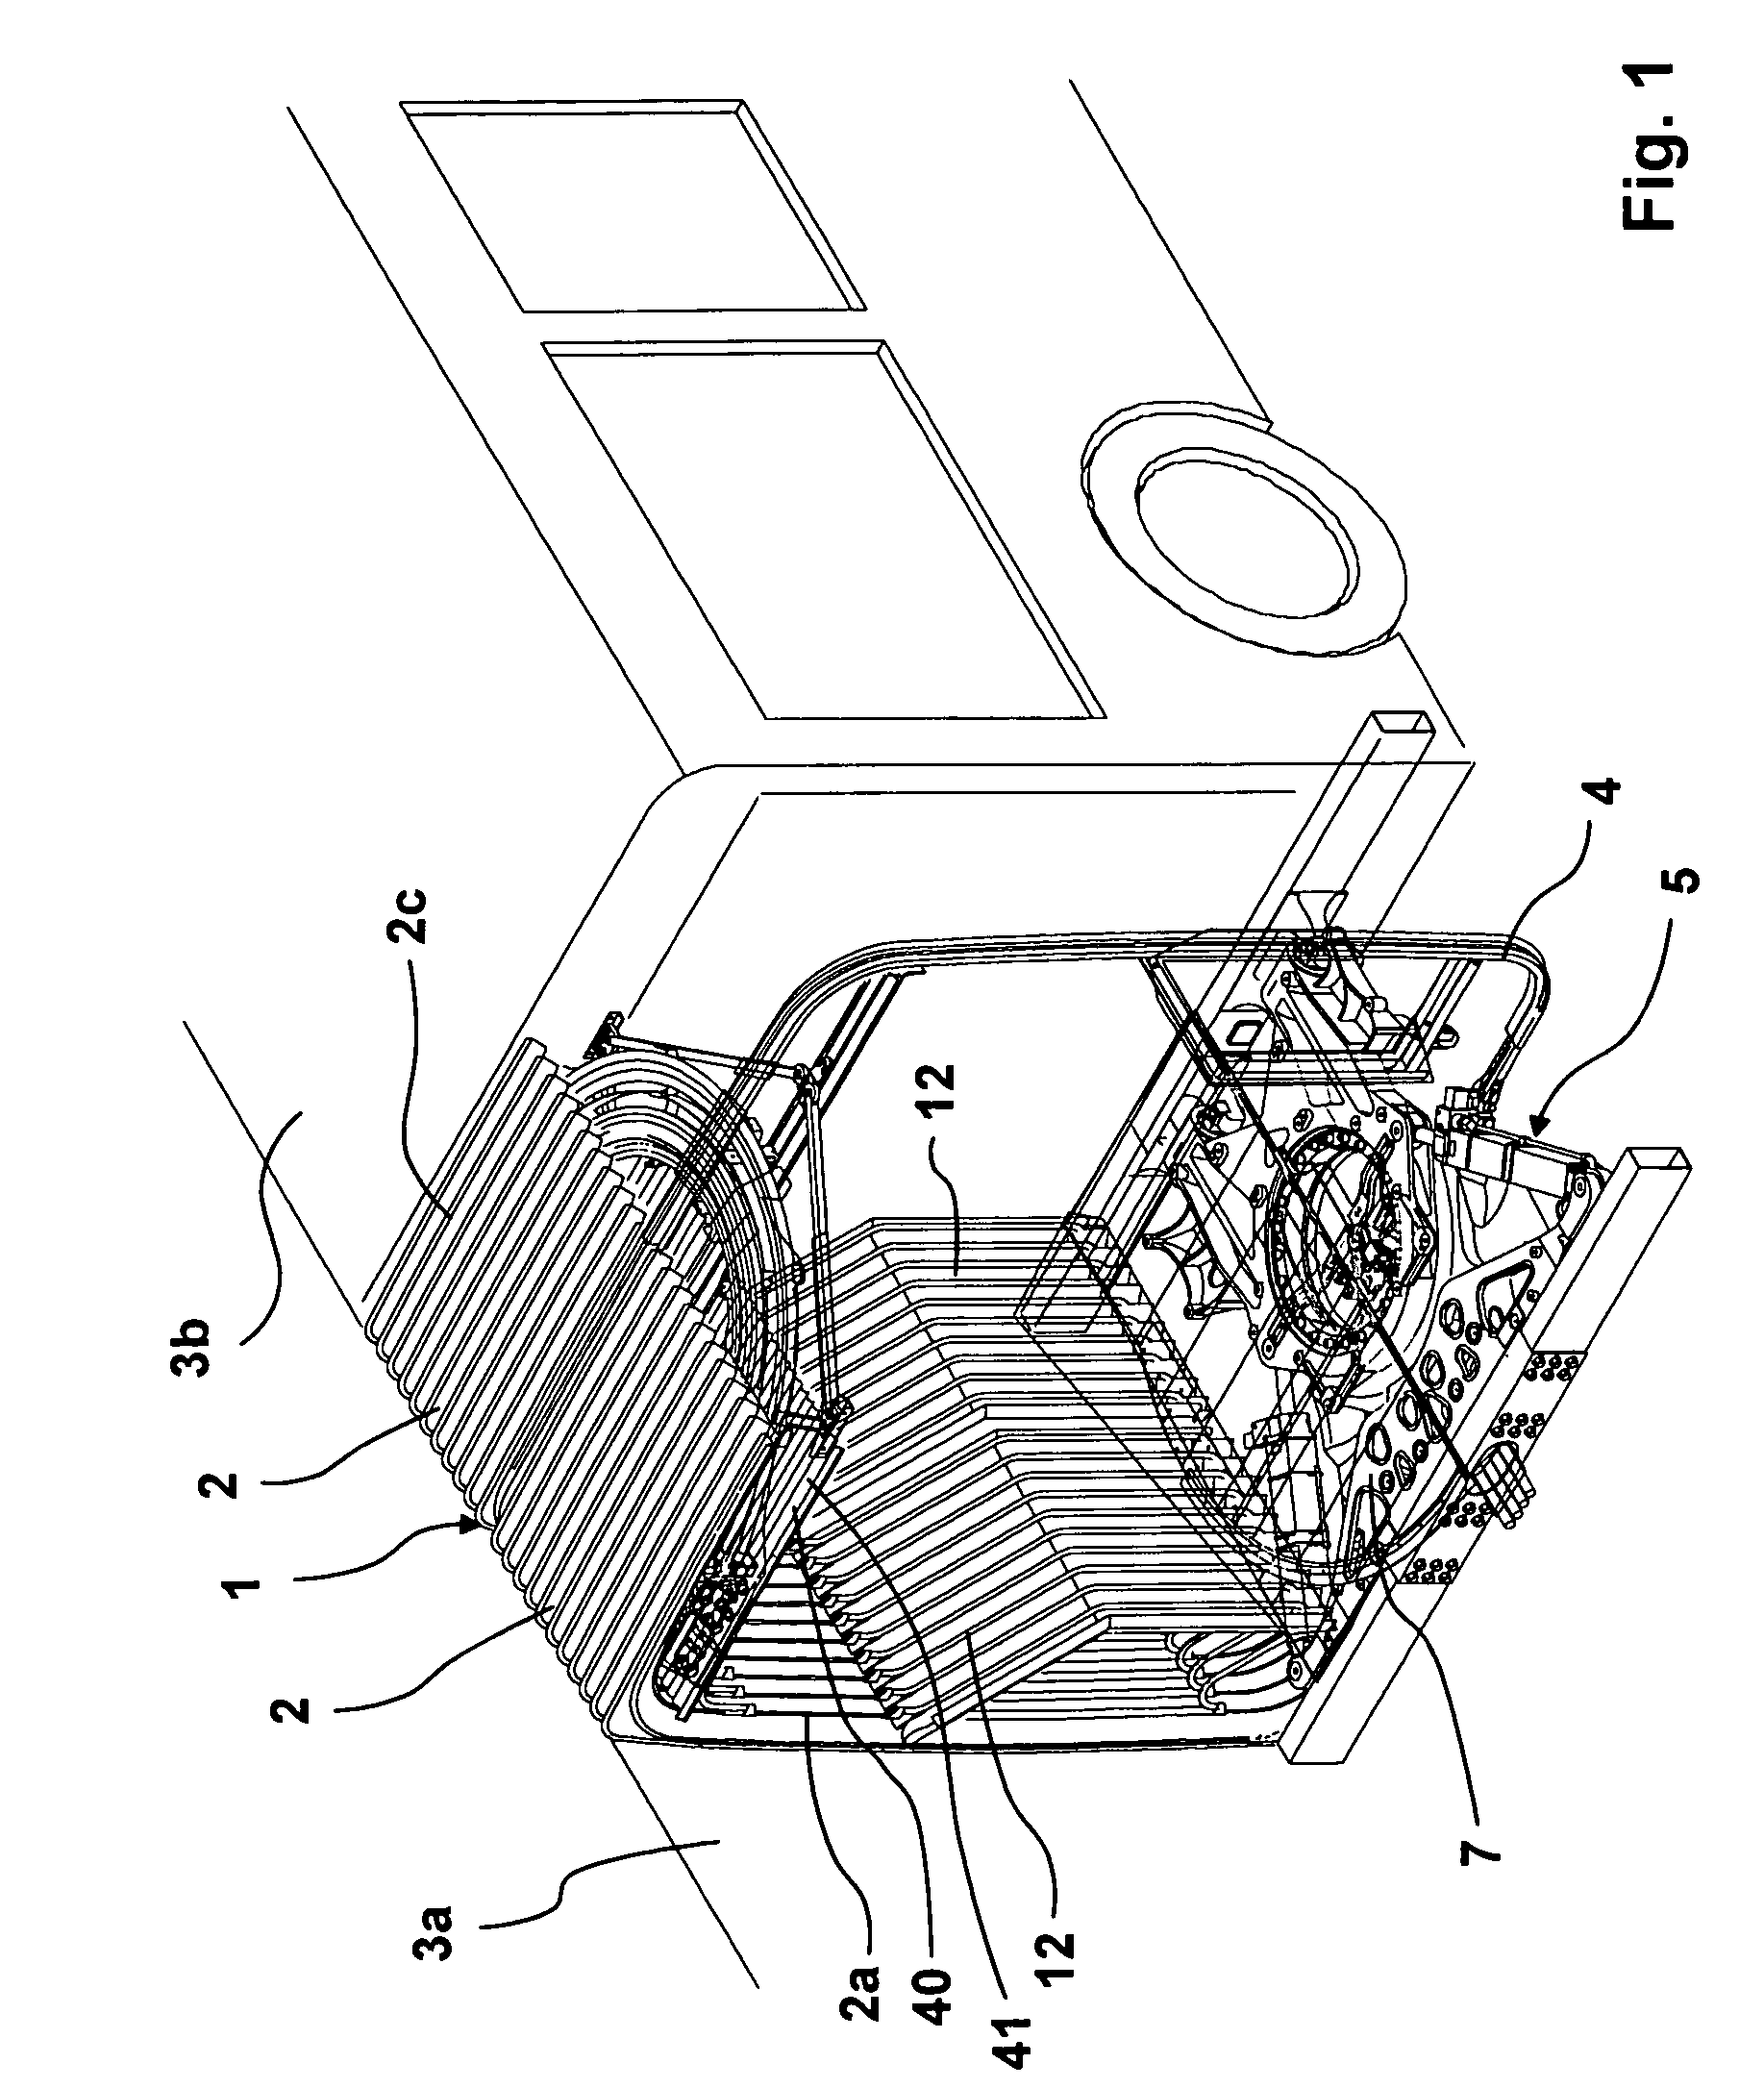 Apparatus for covering the track joint (track joint cover) between the rotary plate and the bellows of a connection between two hinge-linked vehicle sections